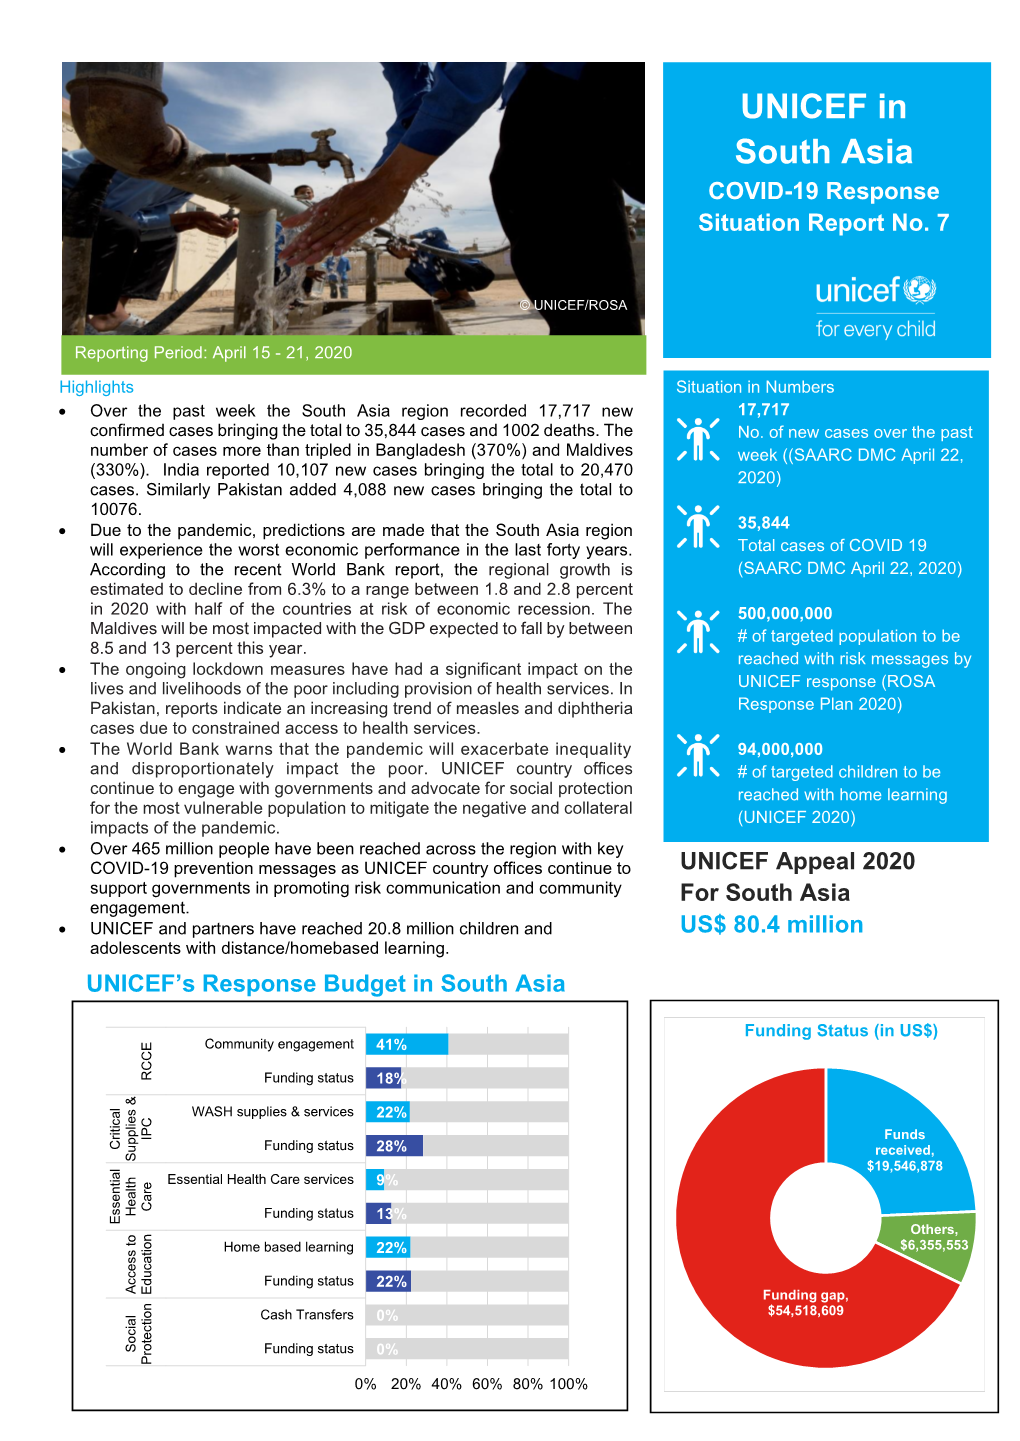 UNICEF in South Asia COVID-19 Response Situation Report No